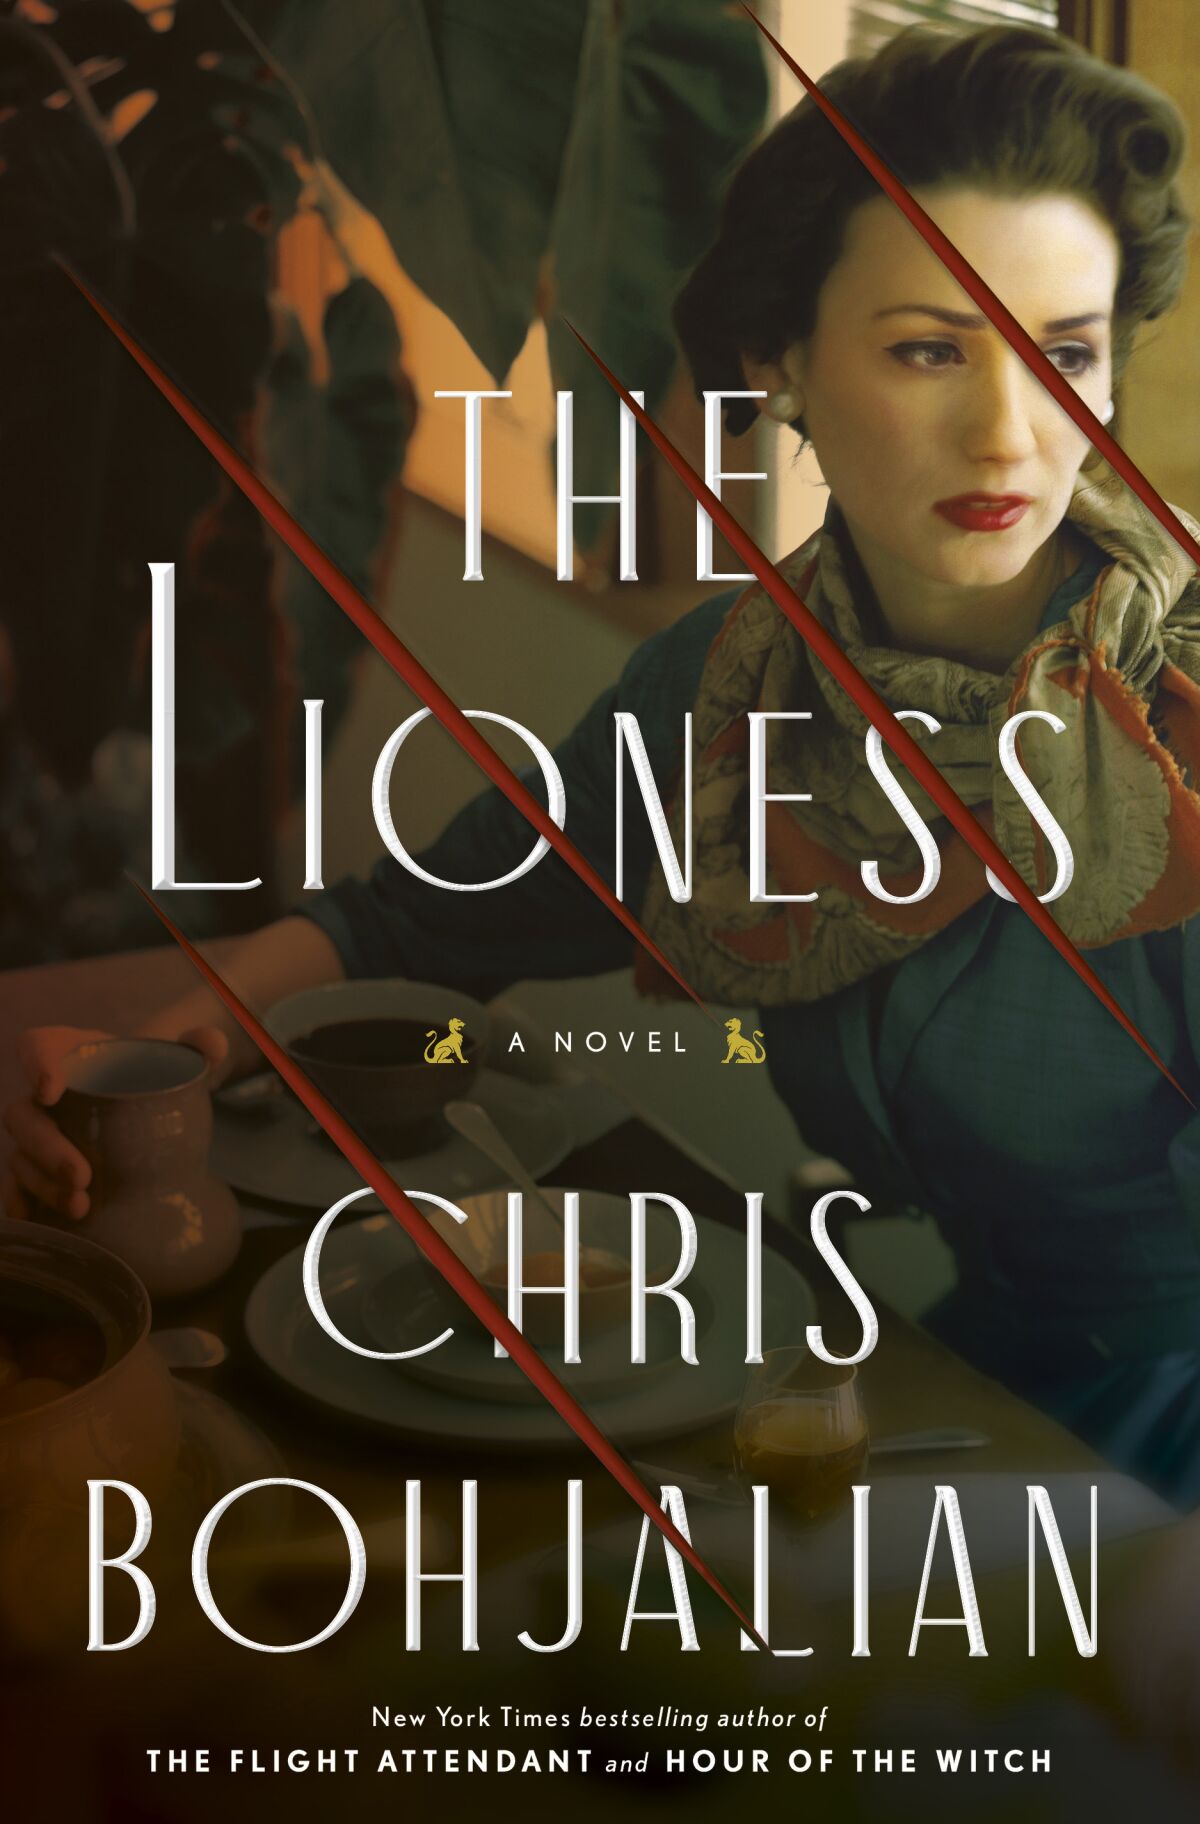 "The Lioness" book cover showing an unhappy woman and red slash marks across the cover title and picture